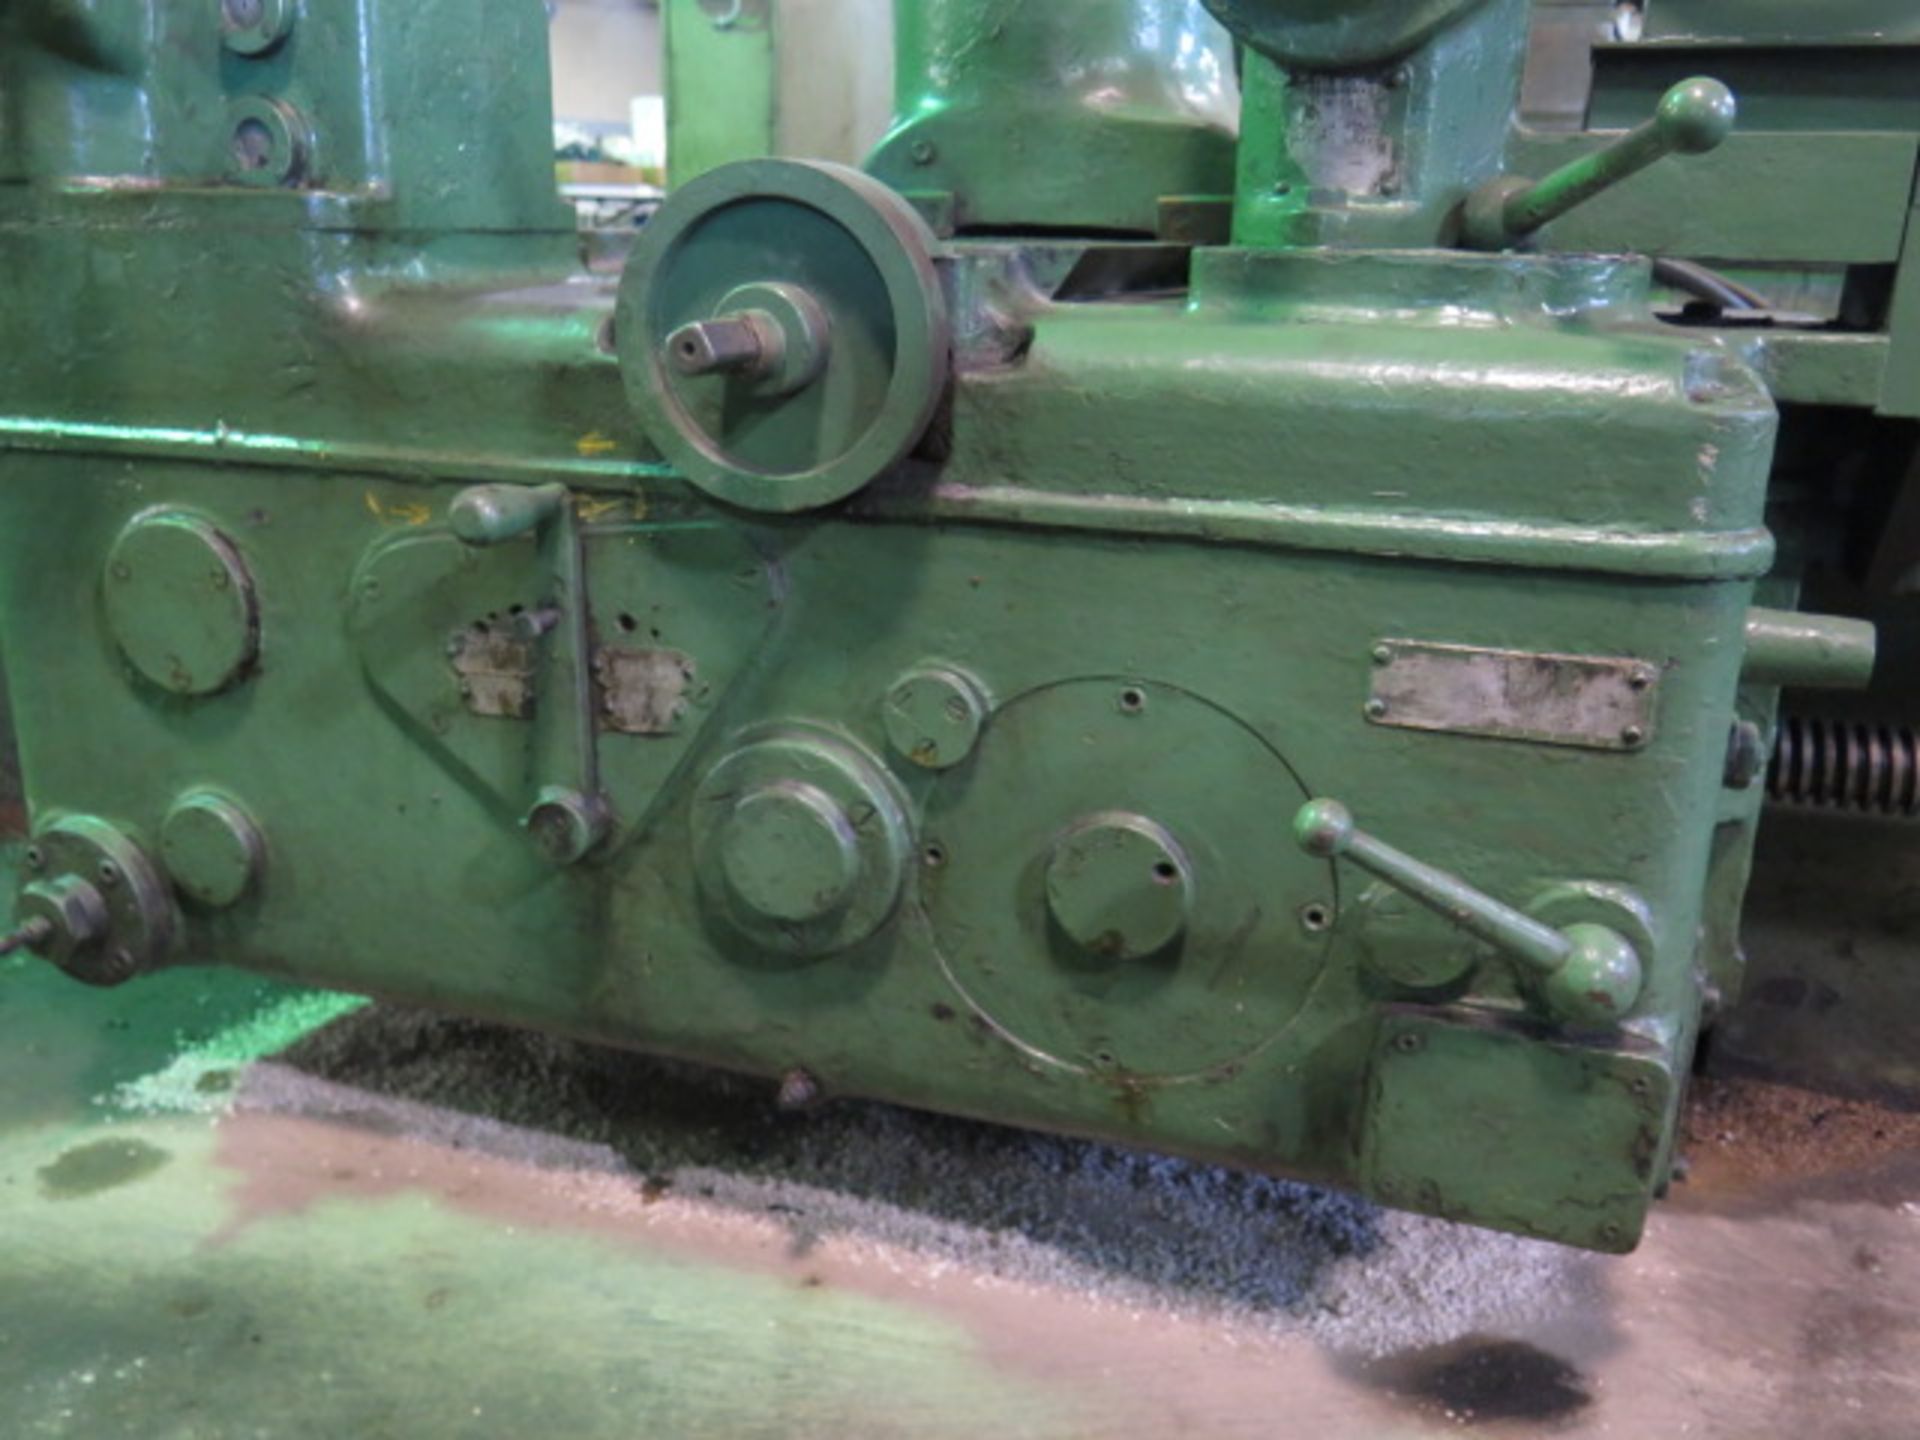 Niles A54P 62” x 140” Lathe s/n 23579 w/ 3.94-232 RPM, Inch Threading, Steady Rest, SOLD AS IS - Image 15 of 20